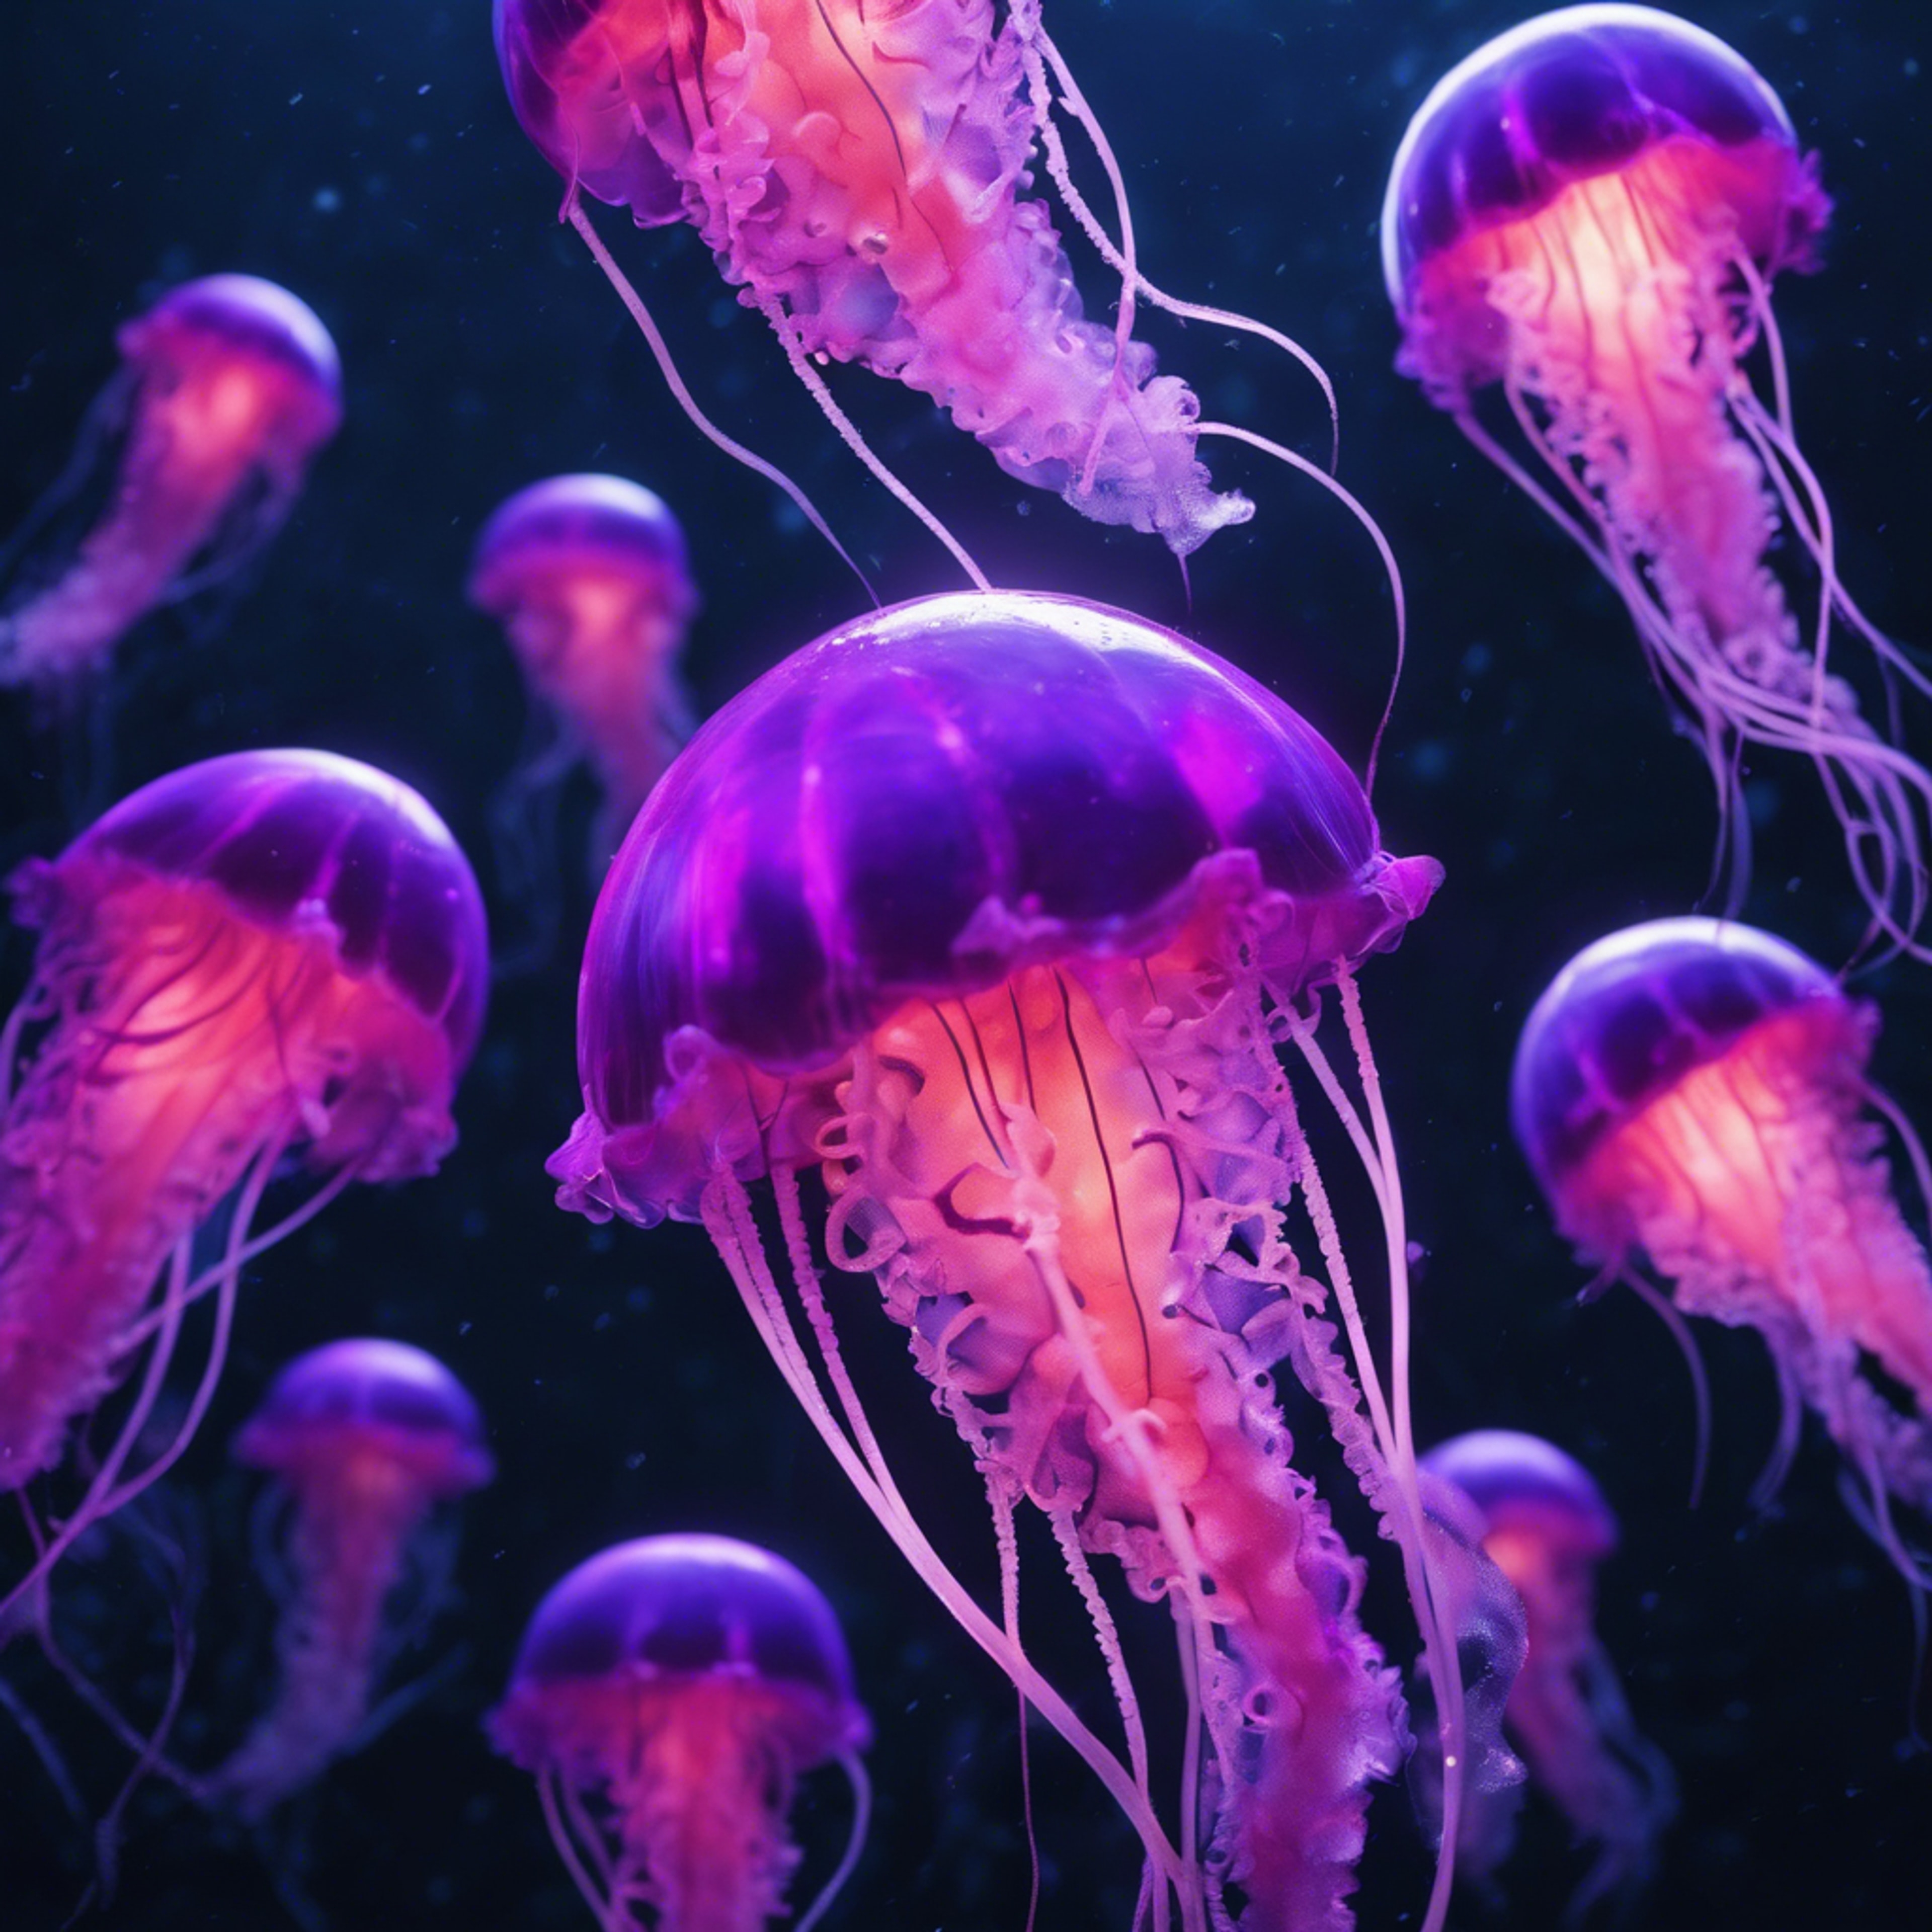 An array of neon purple jellyfish gracefully floating in the cool, dark depths of the ocean. Wallpaper[2e15e39636af455f837d]